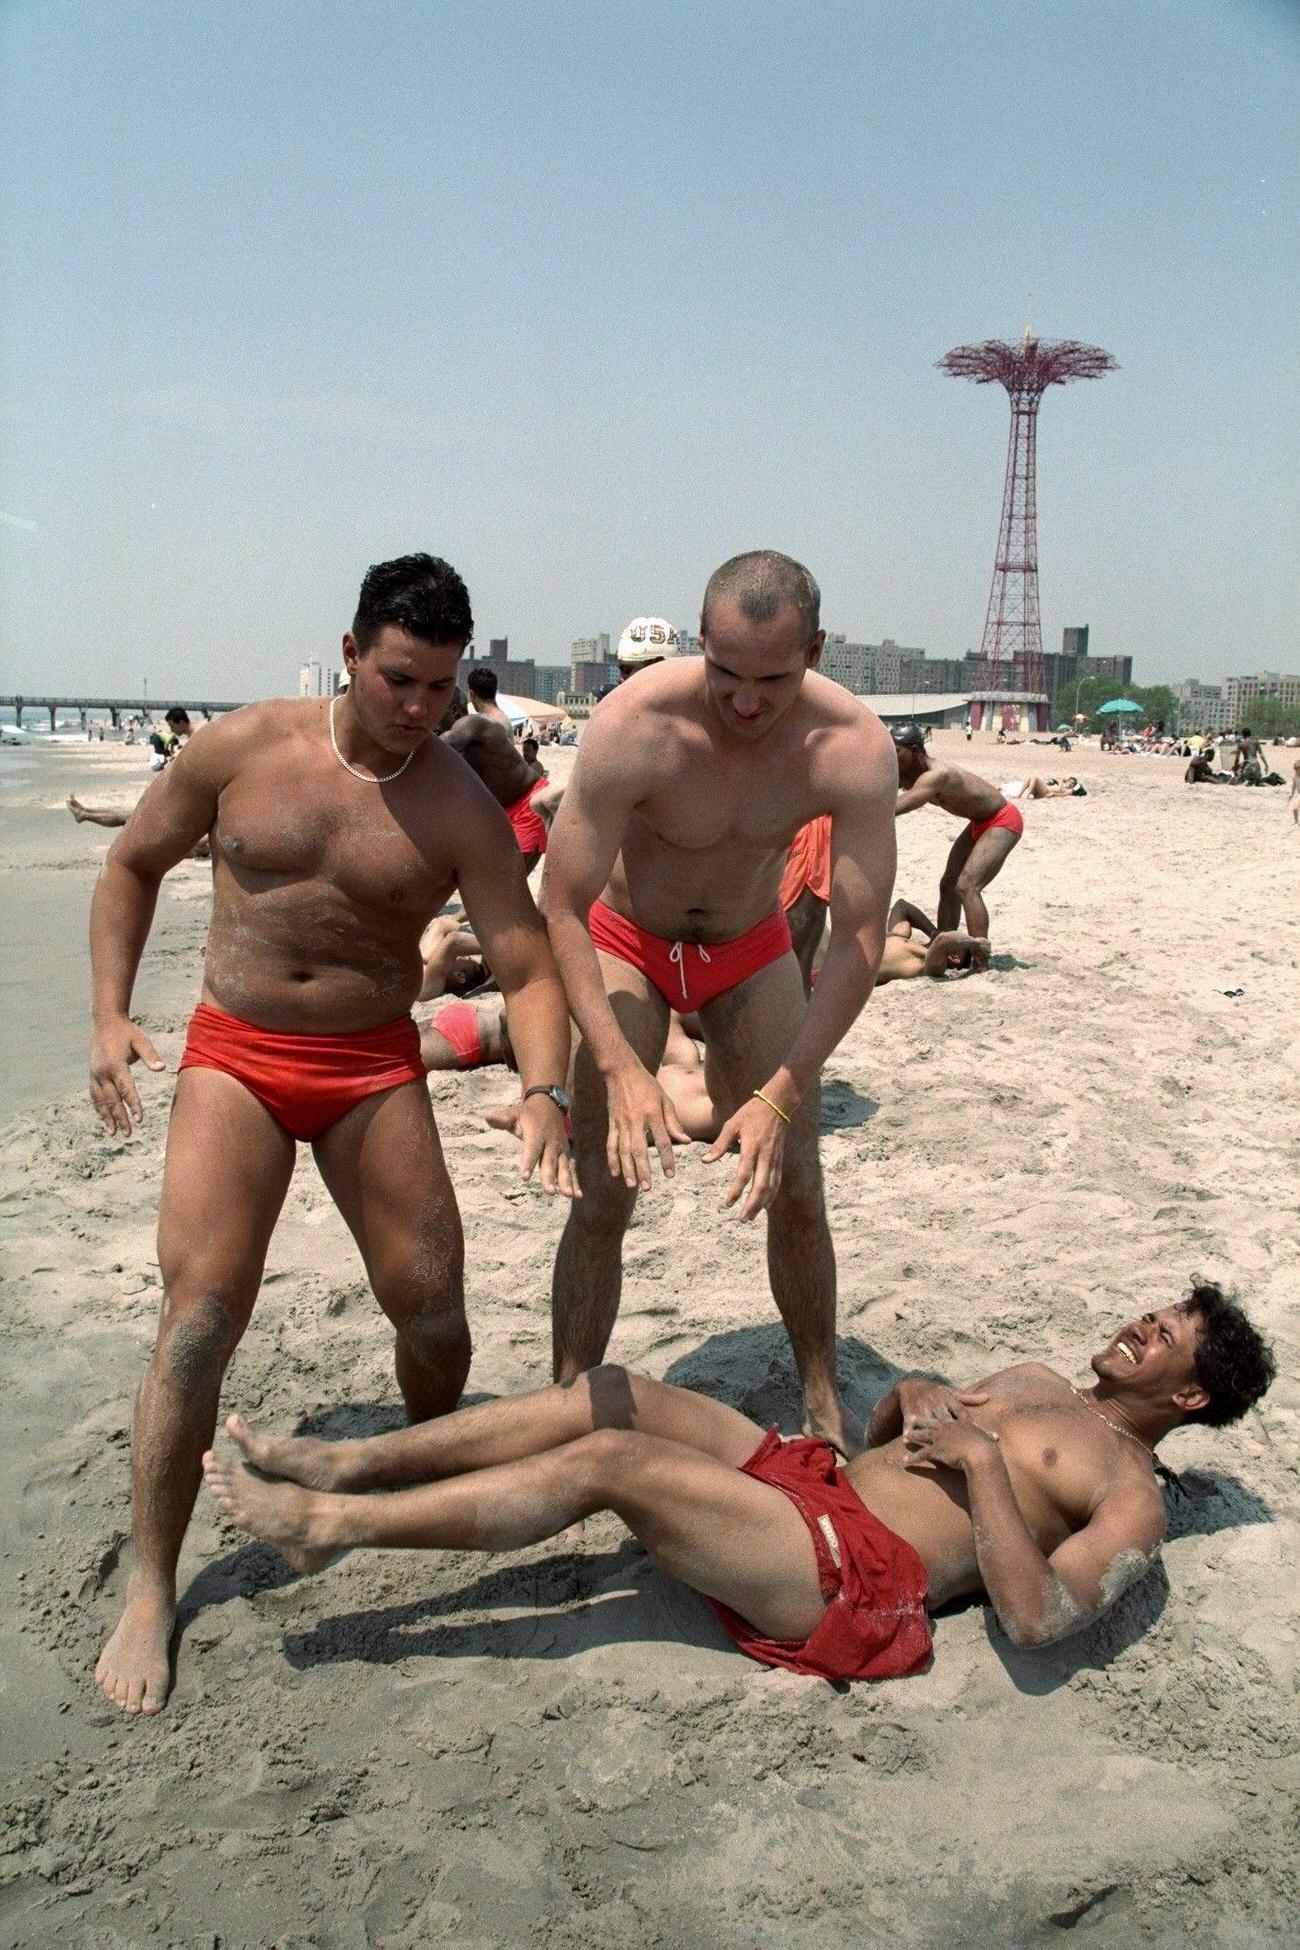 Lifeguards Doing Stomach Crunches At Coney Island Beach, June 10